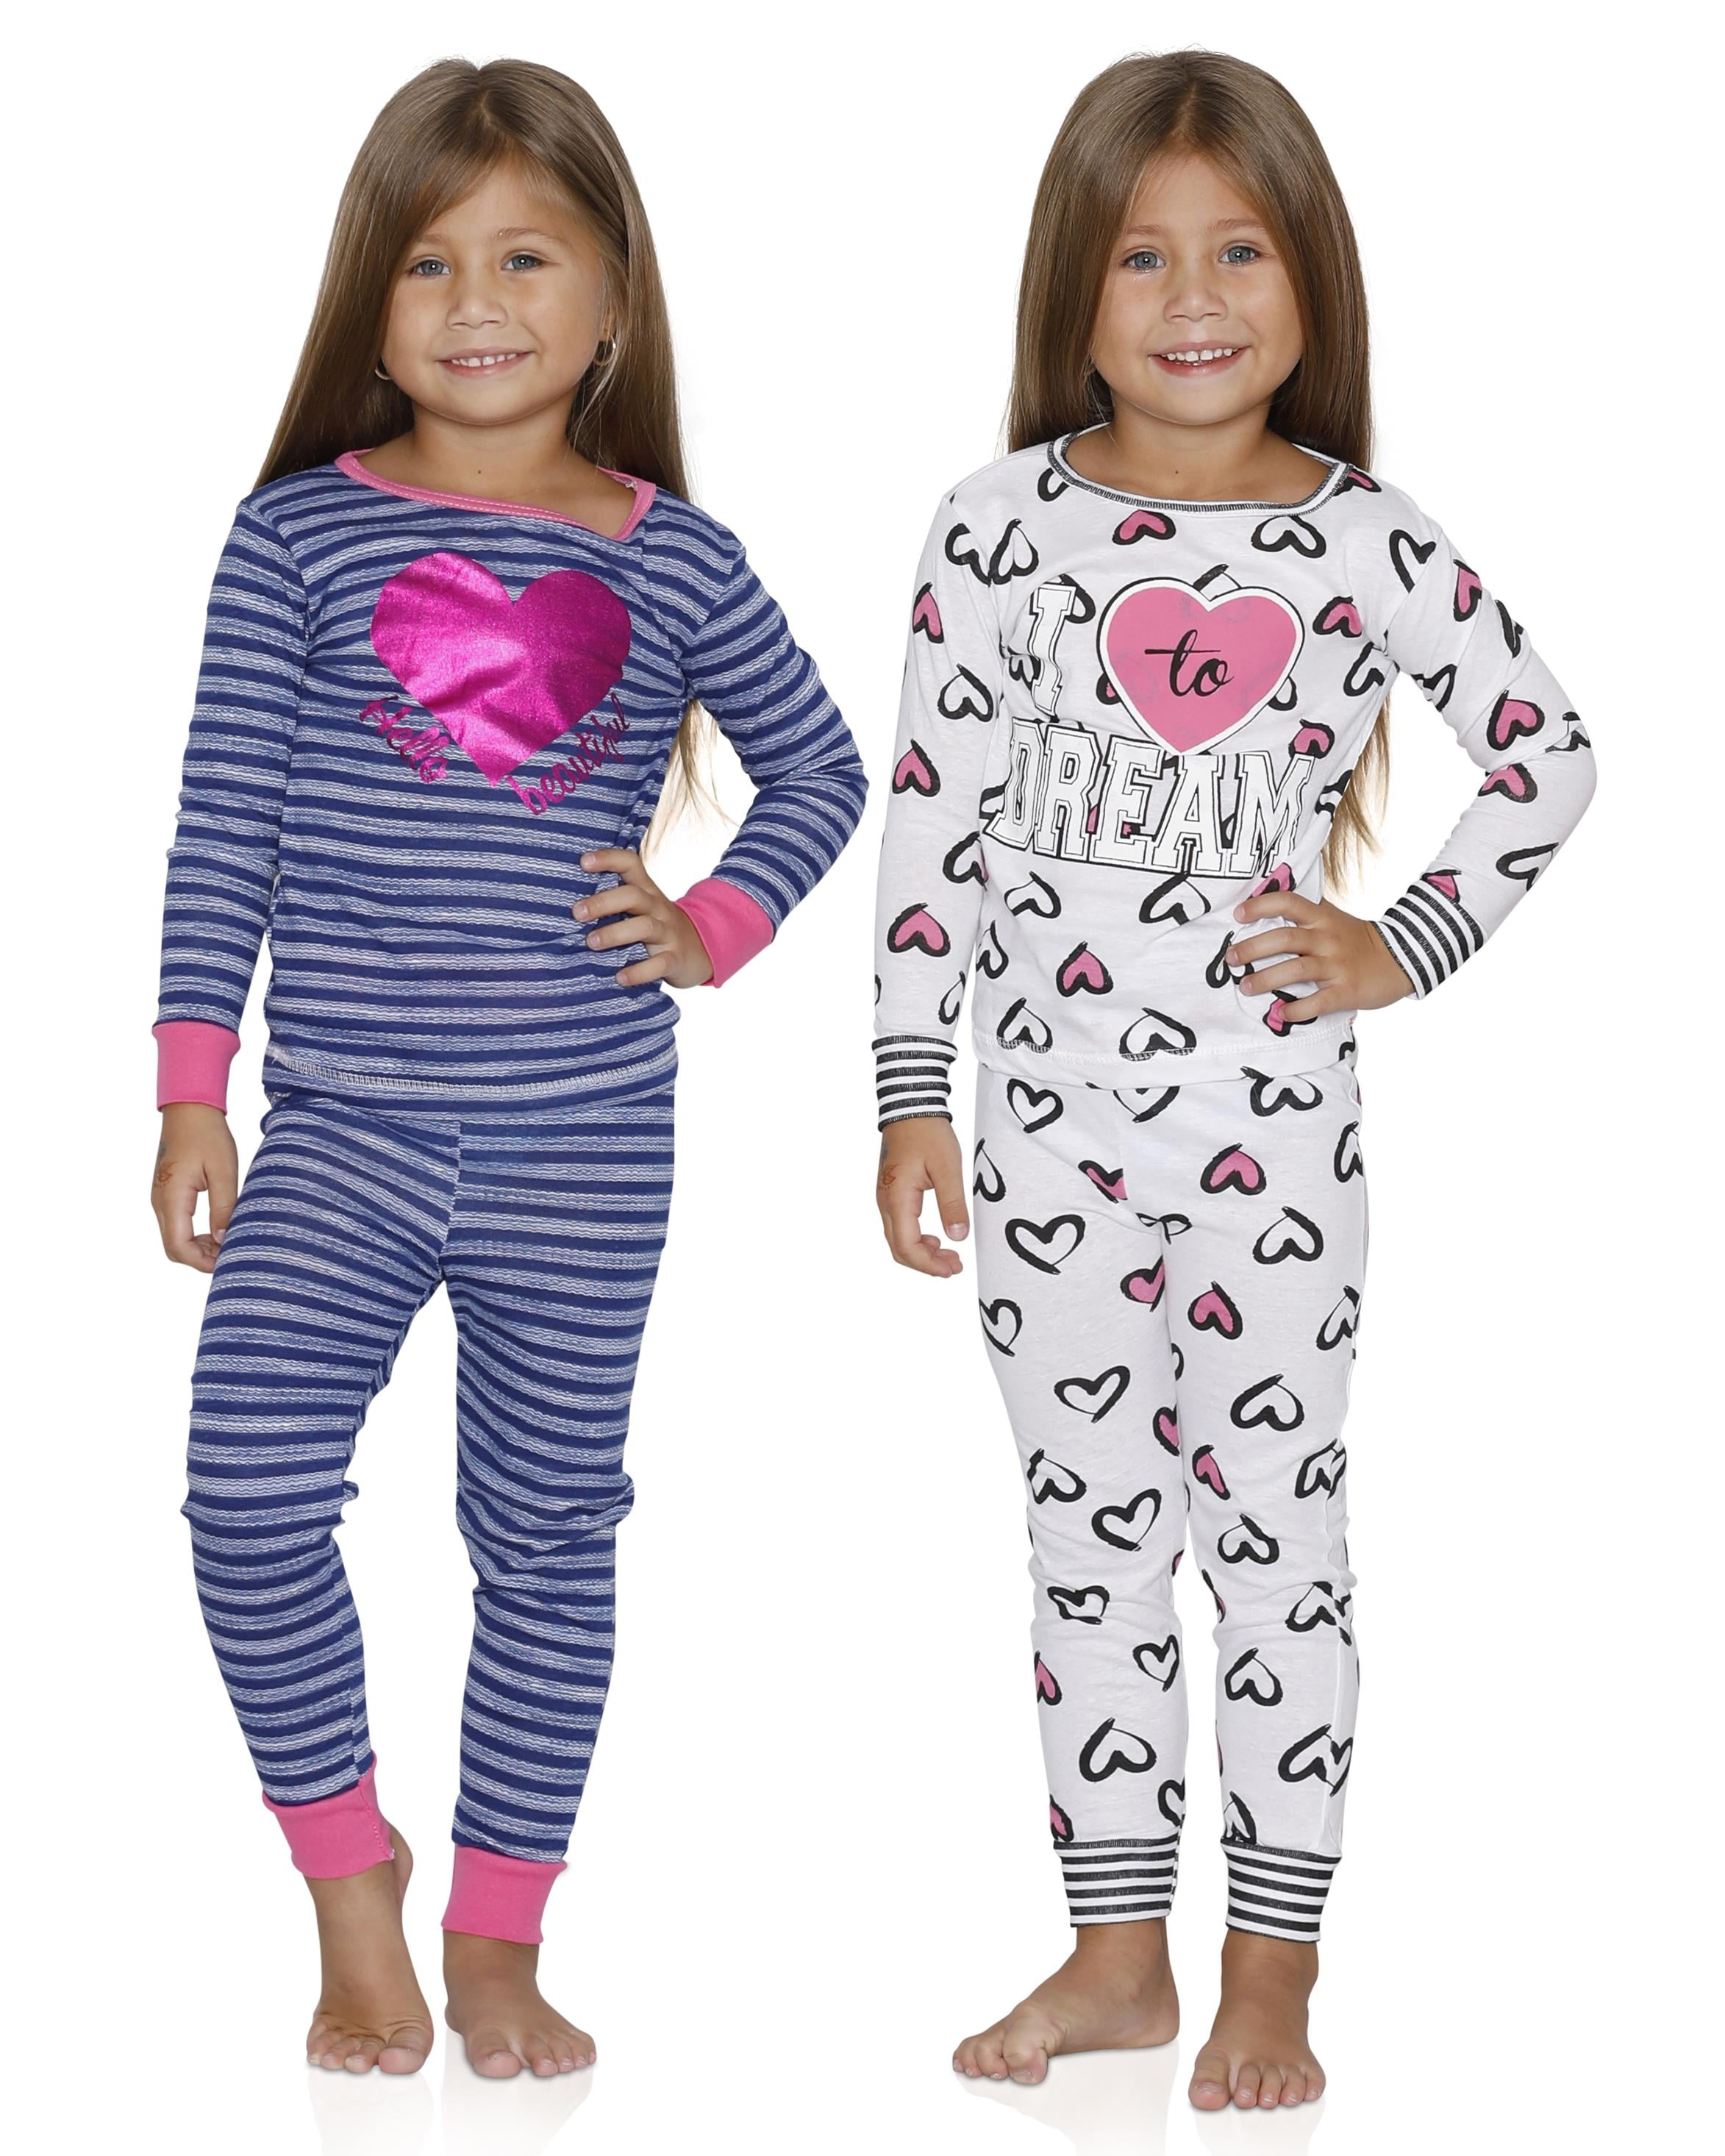 Sultan Industries - Girls Pajama Cute Costume 4 Piece Pack Cotton Long ...